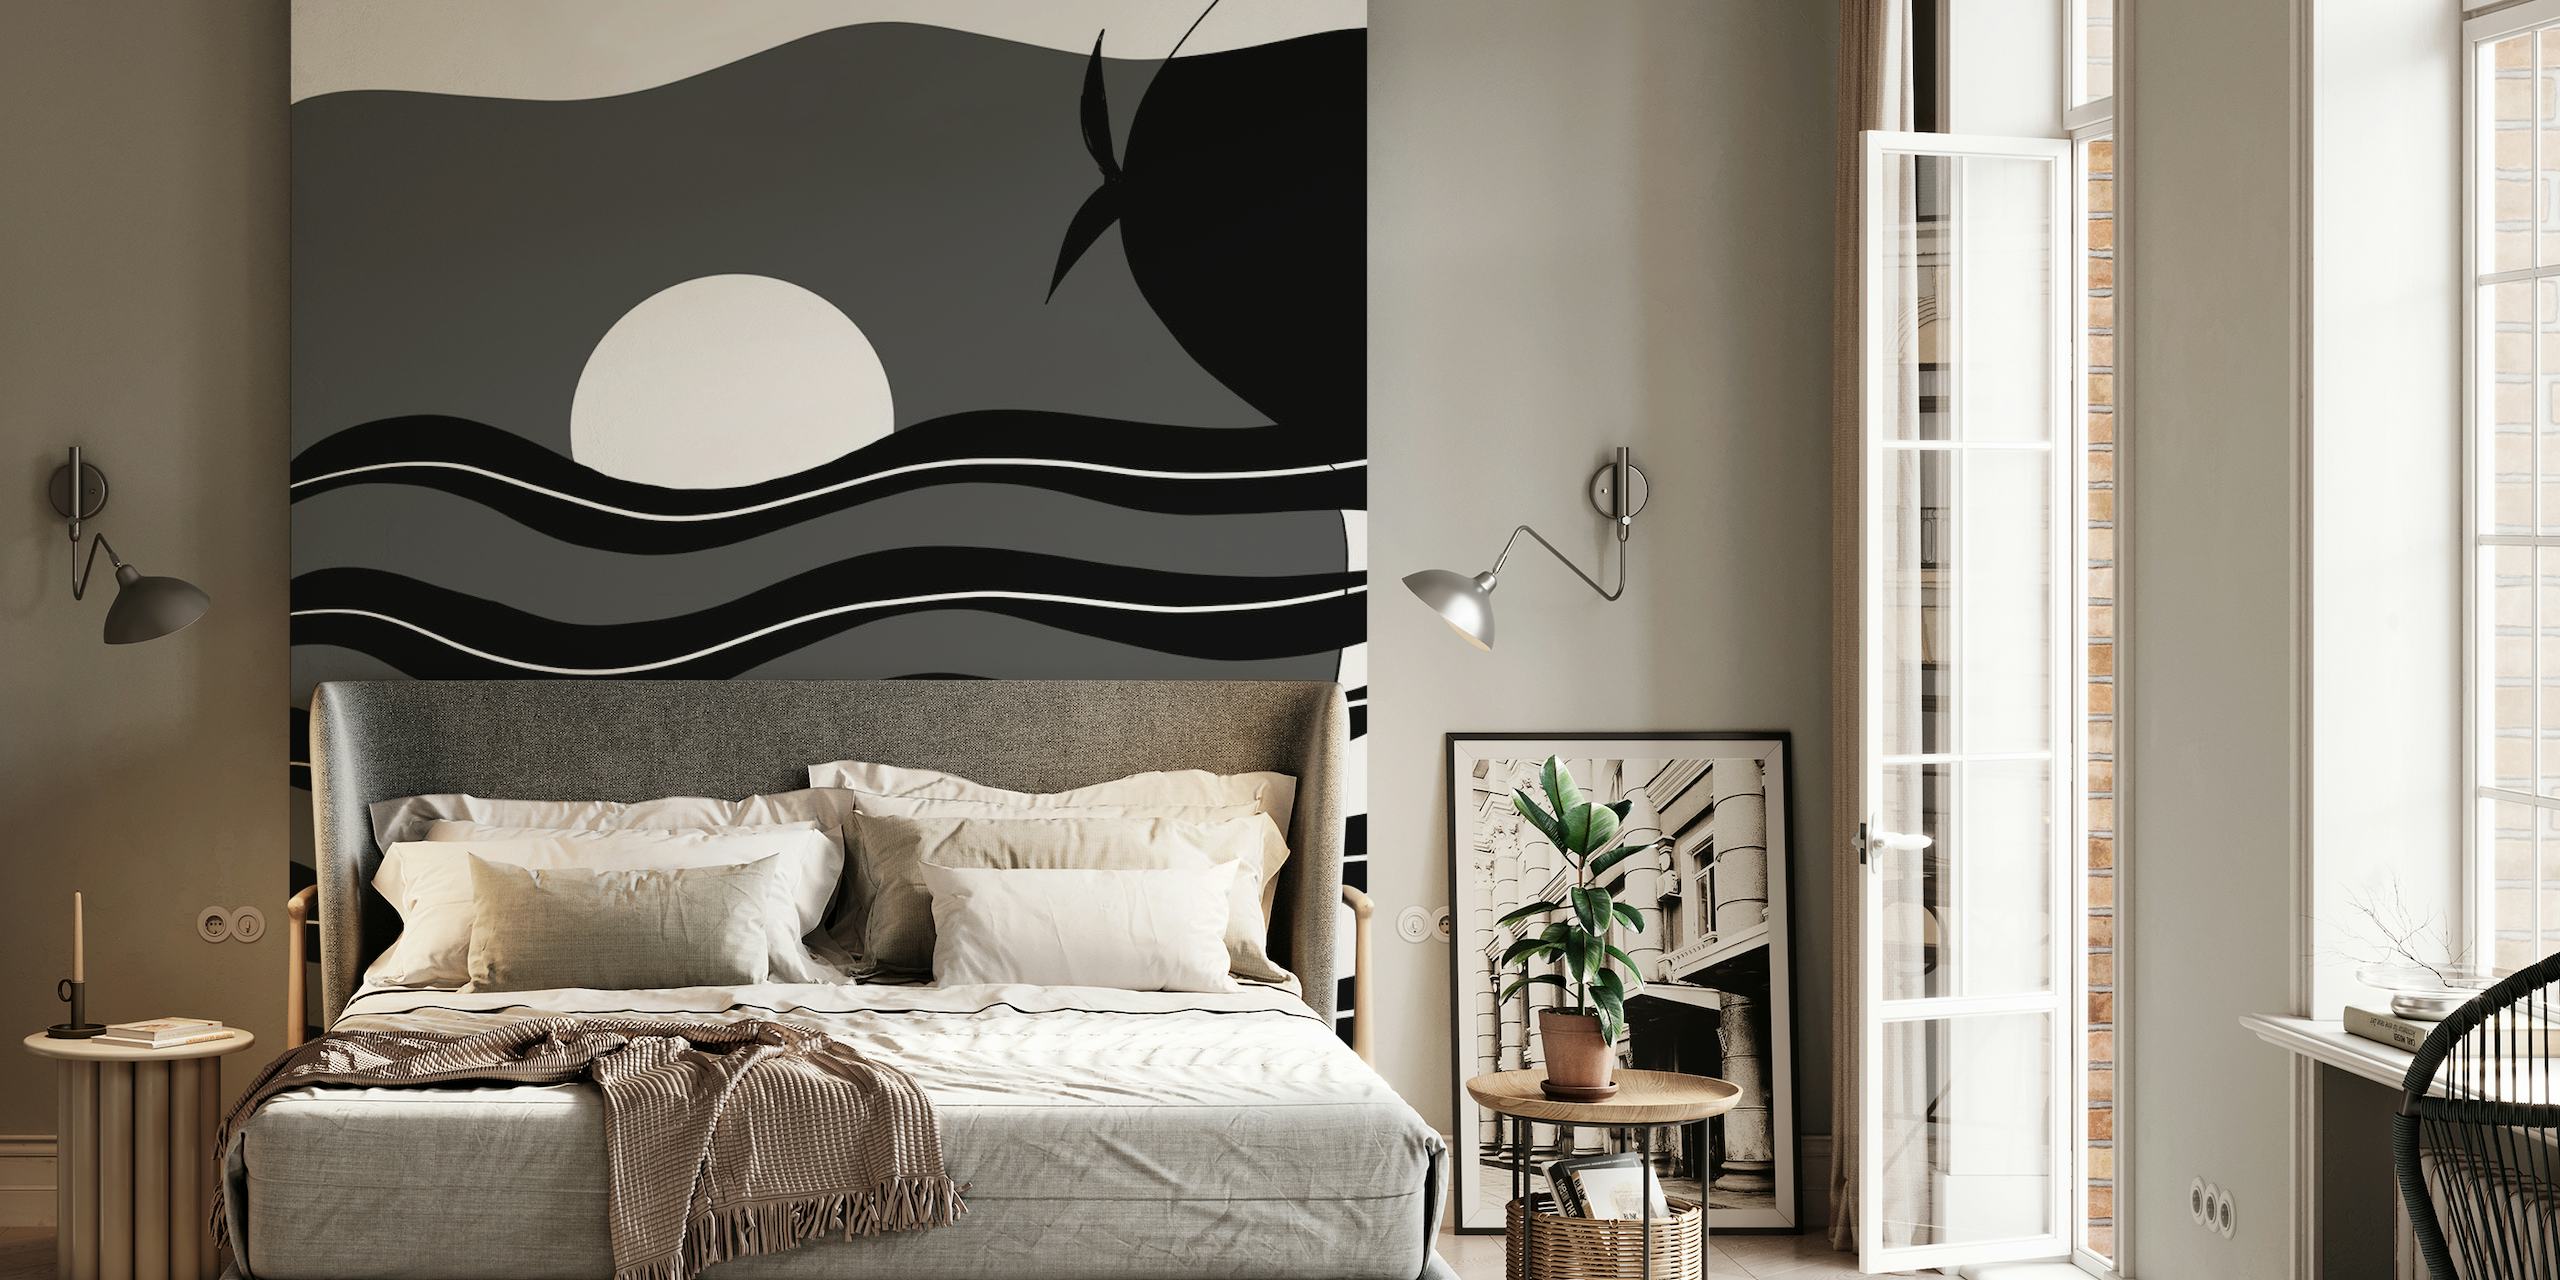 Abstract monochromatic wall mural with woman's silhouette and wavy pool patterns